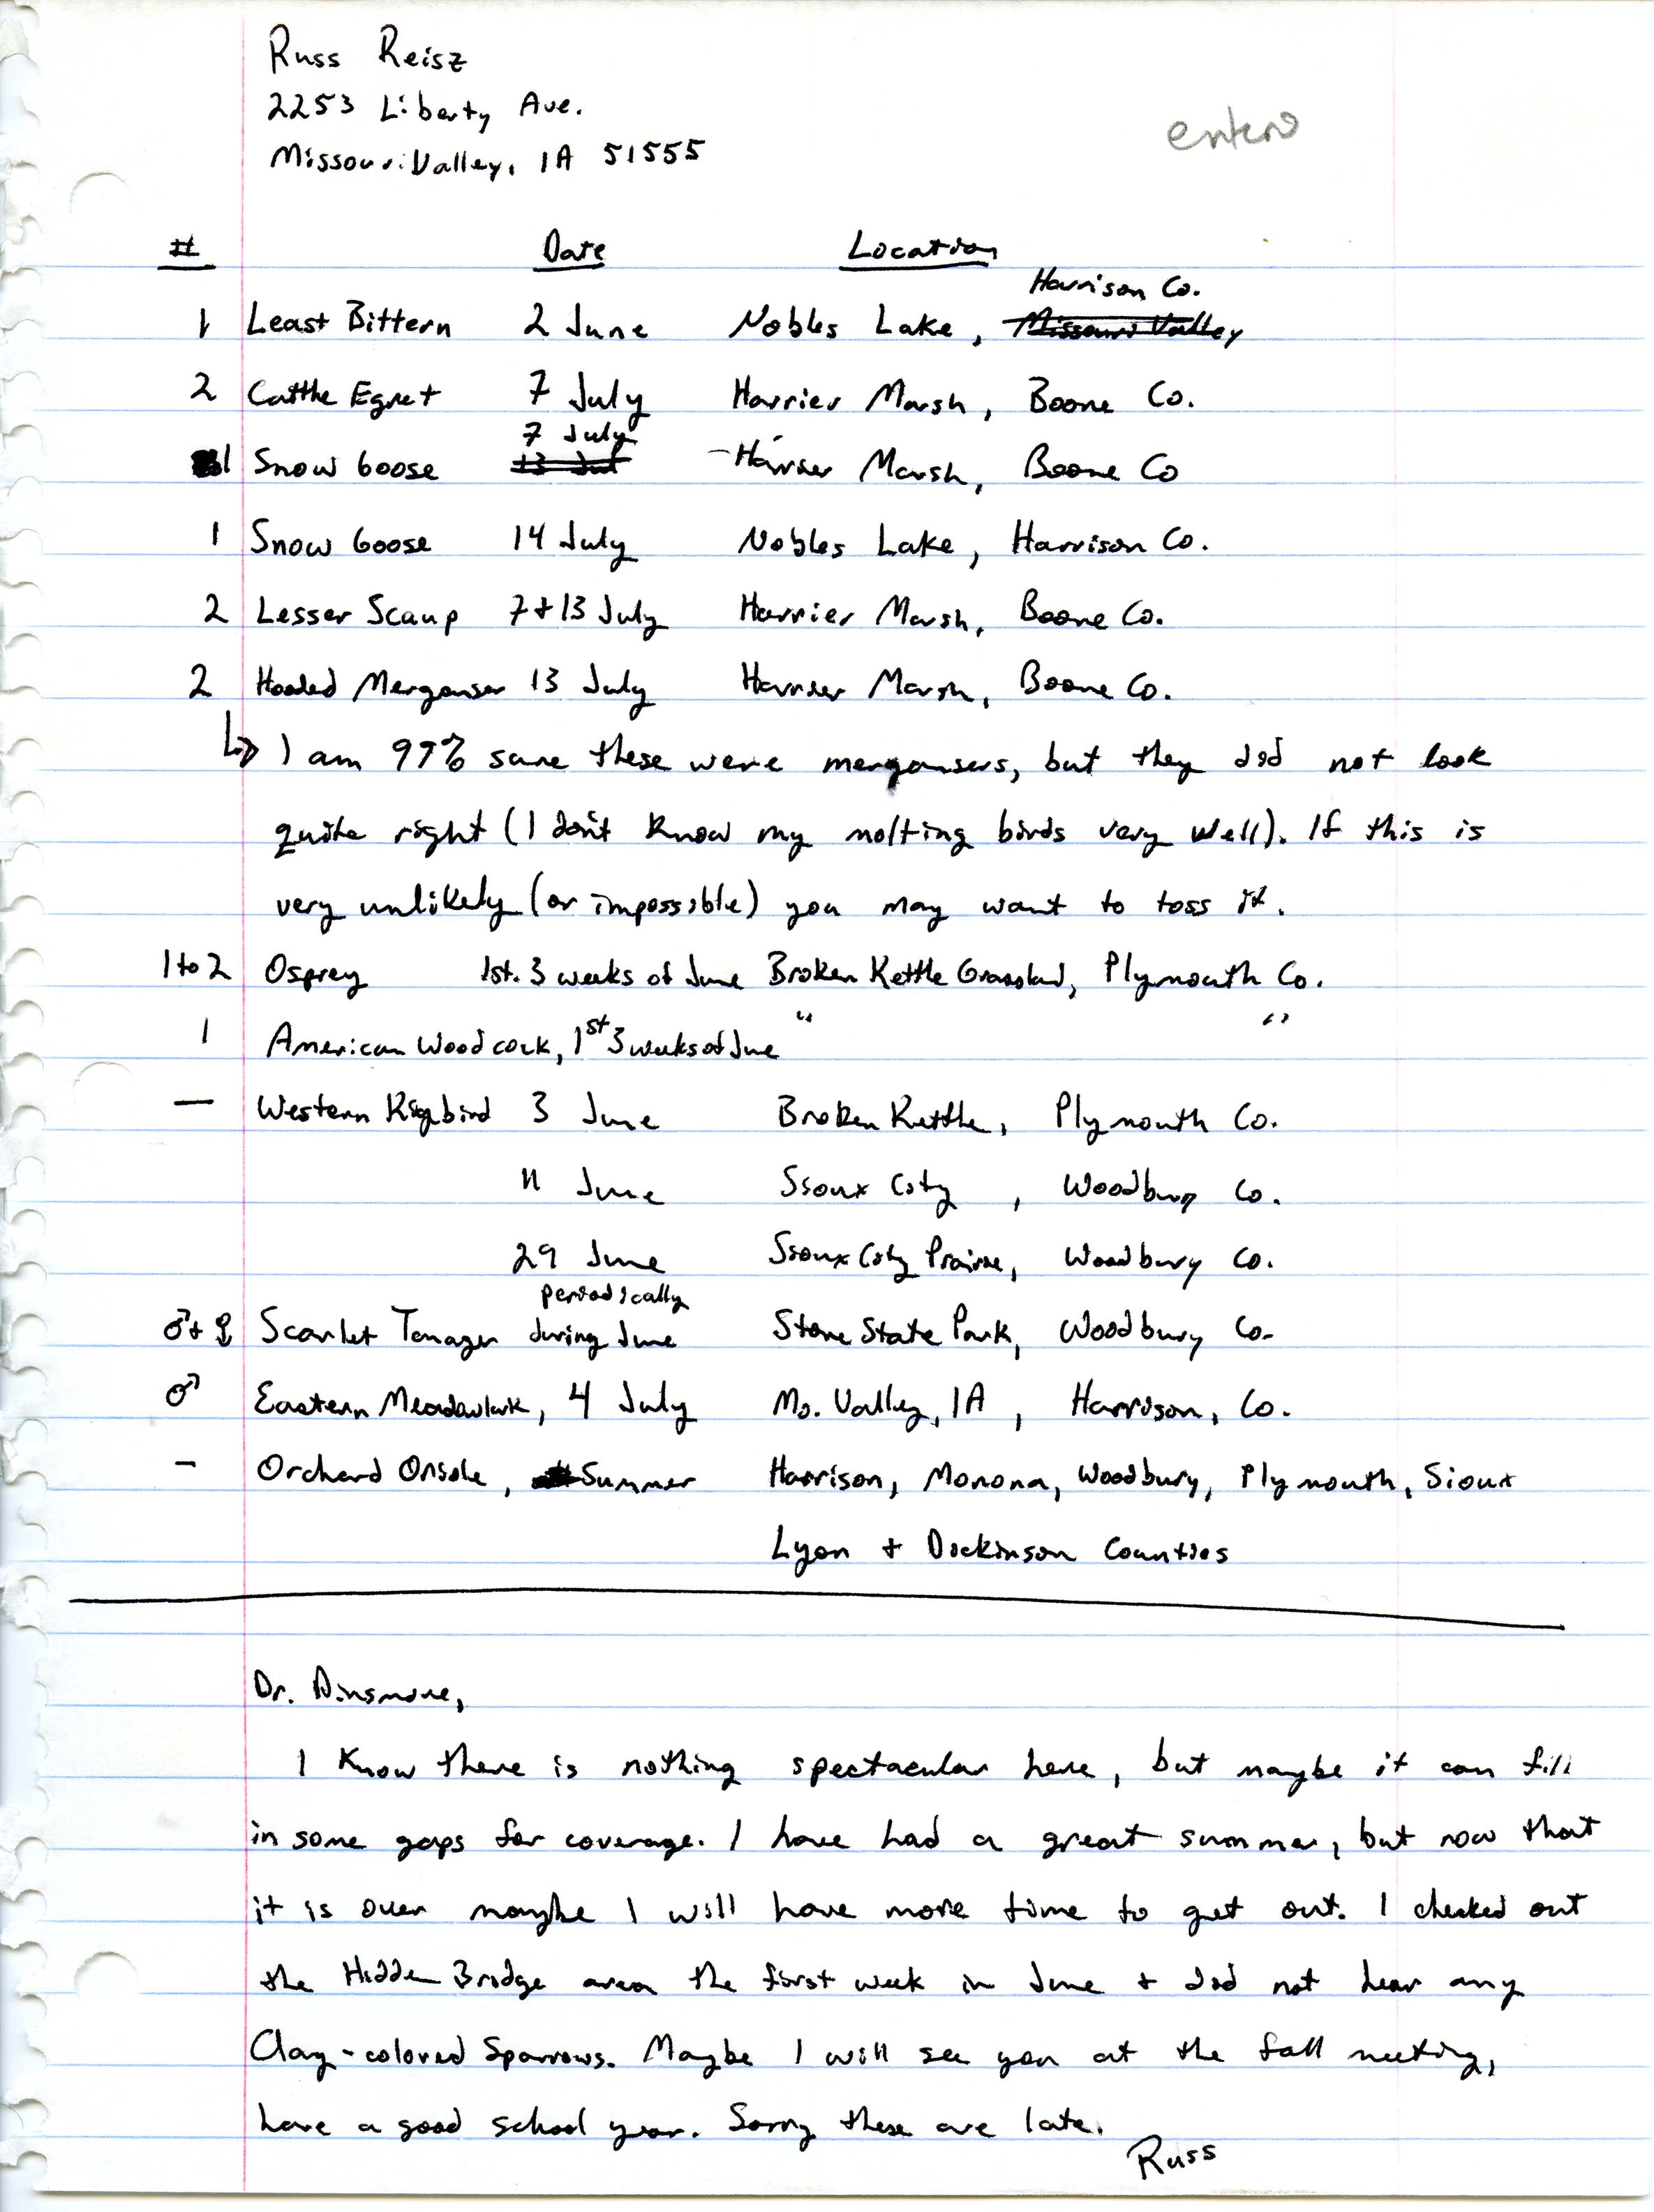 Field notes contributed by Russell Reisz, summer 1996